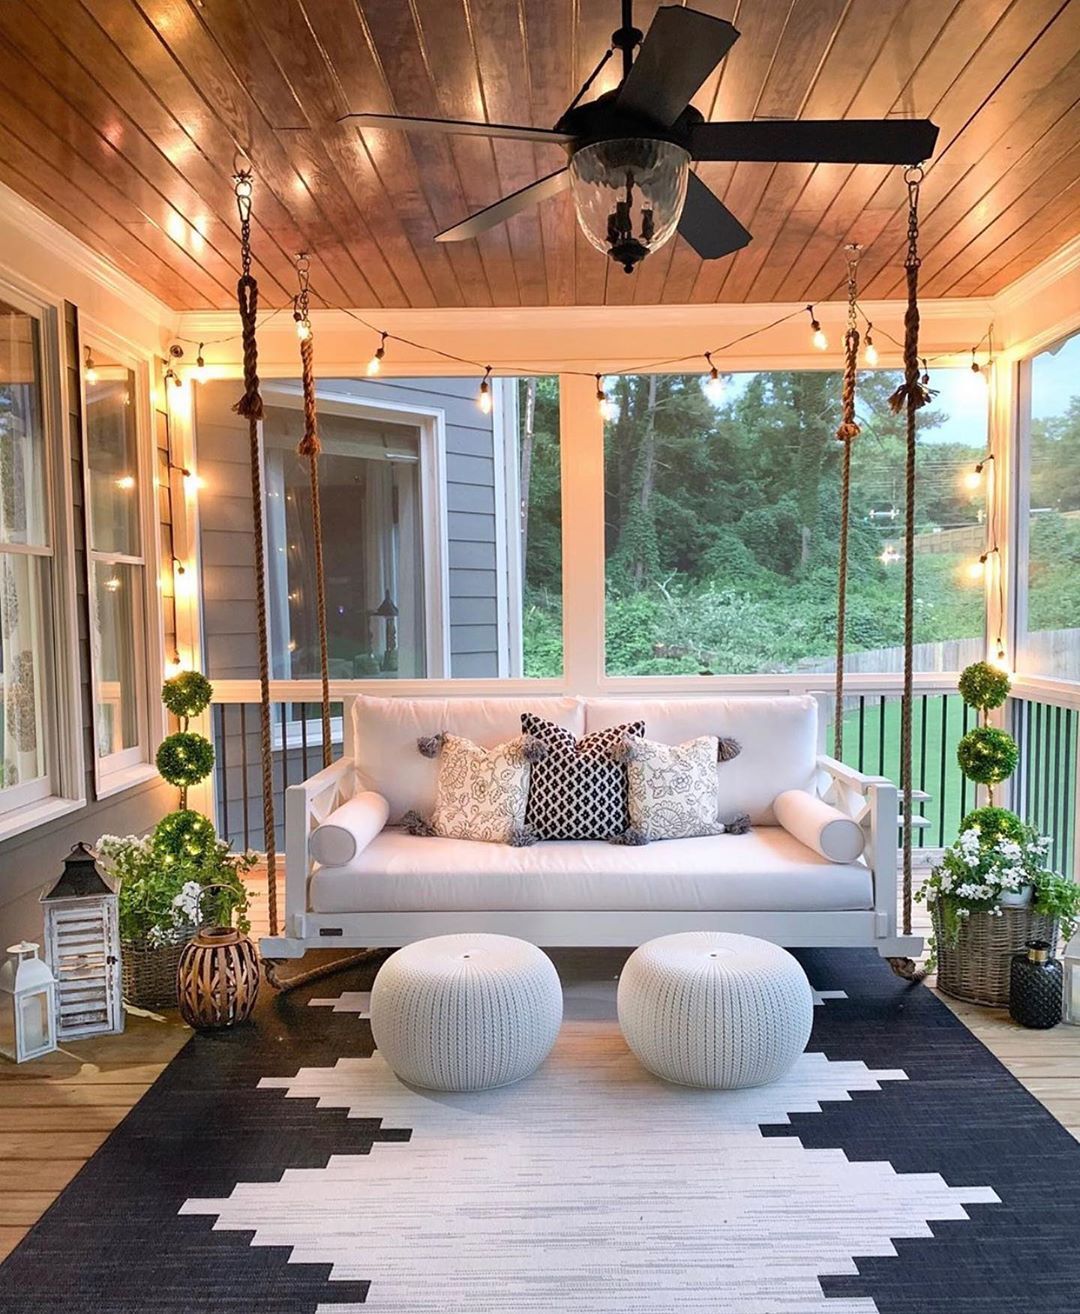 Farmhouse Inspiration on Instagram: “Can we all agree that this is major porch inspiration?! I am obsessed! 😍 . . DESIGNERS PAGE AND DESIGN DETAILS~ 📸: @mygeorgiahouse 🌿 . .…”